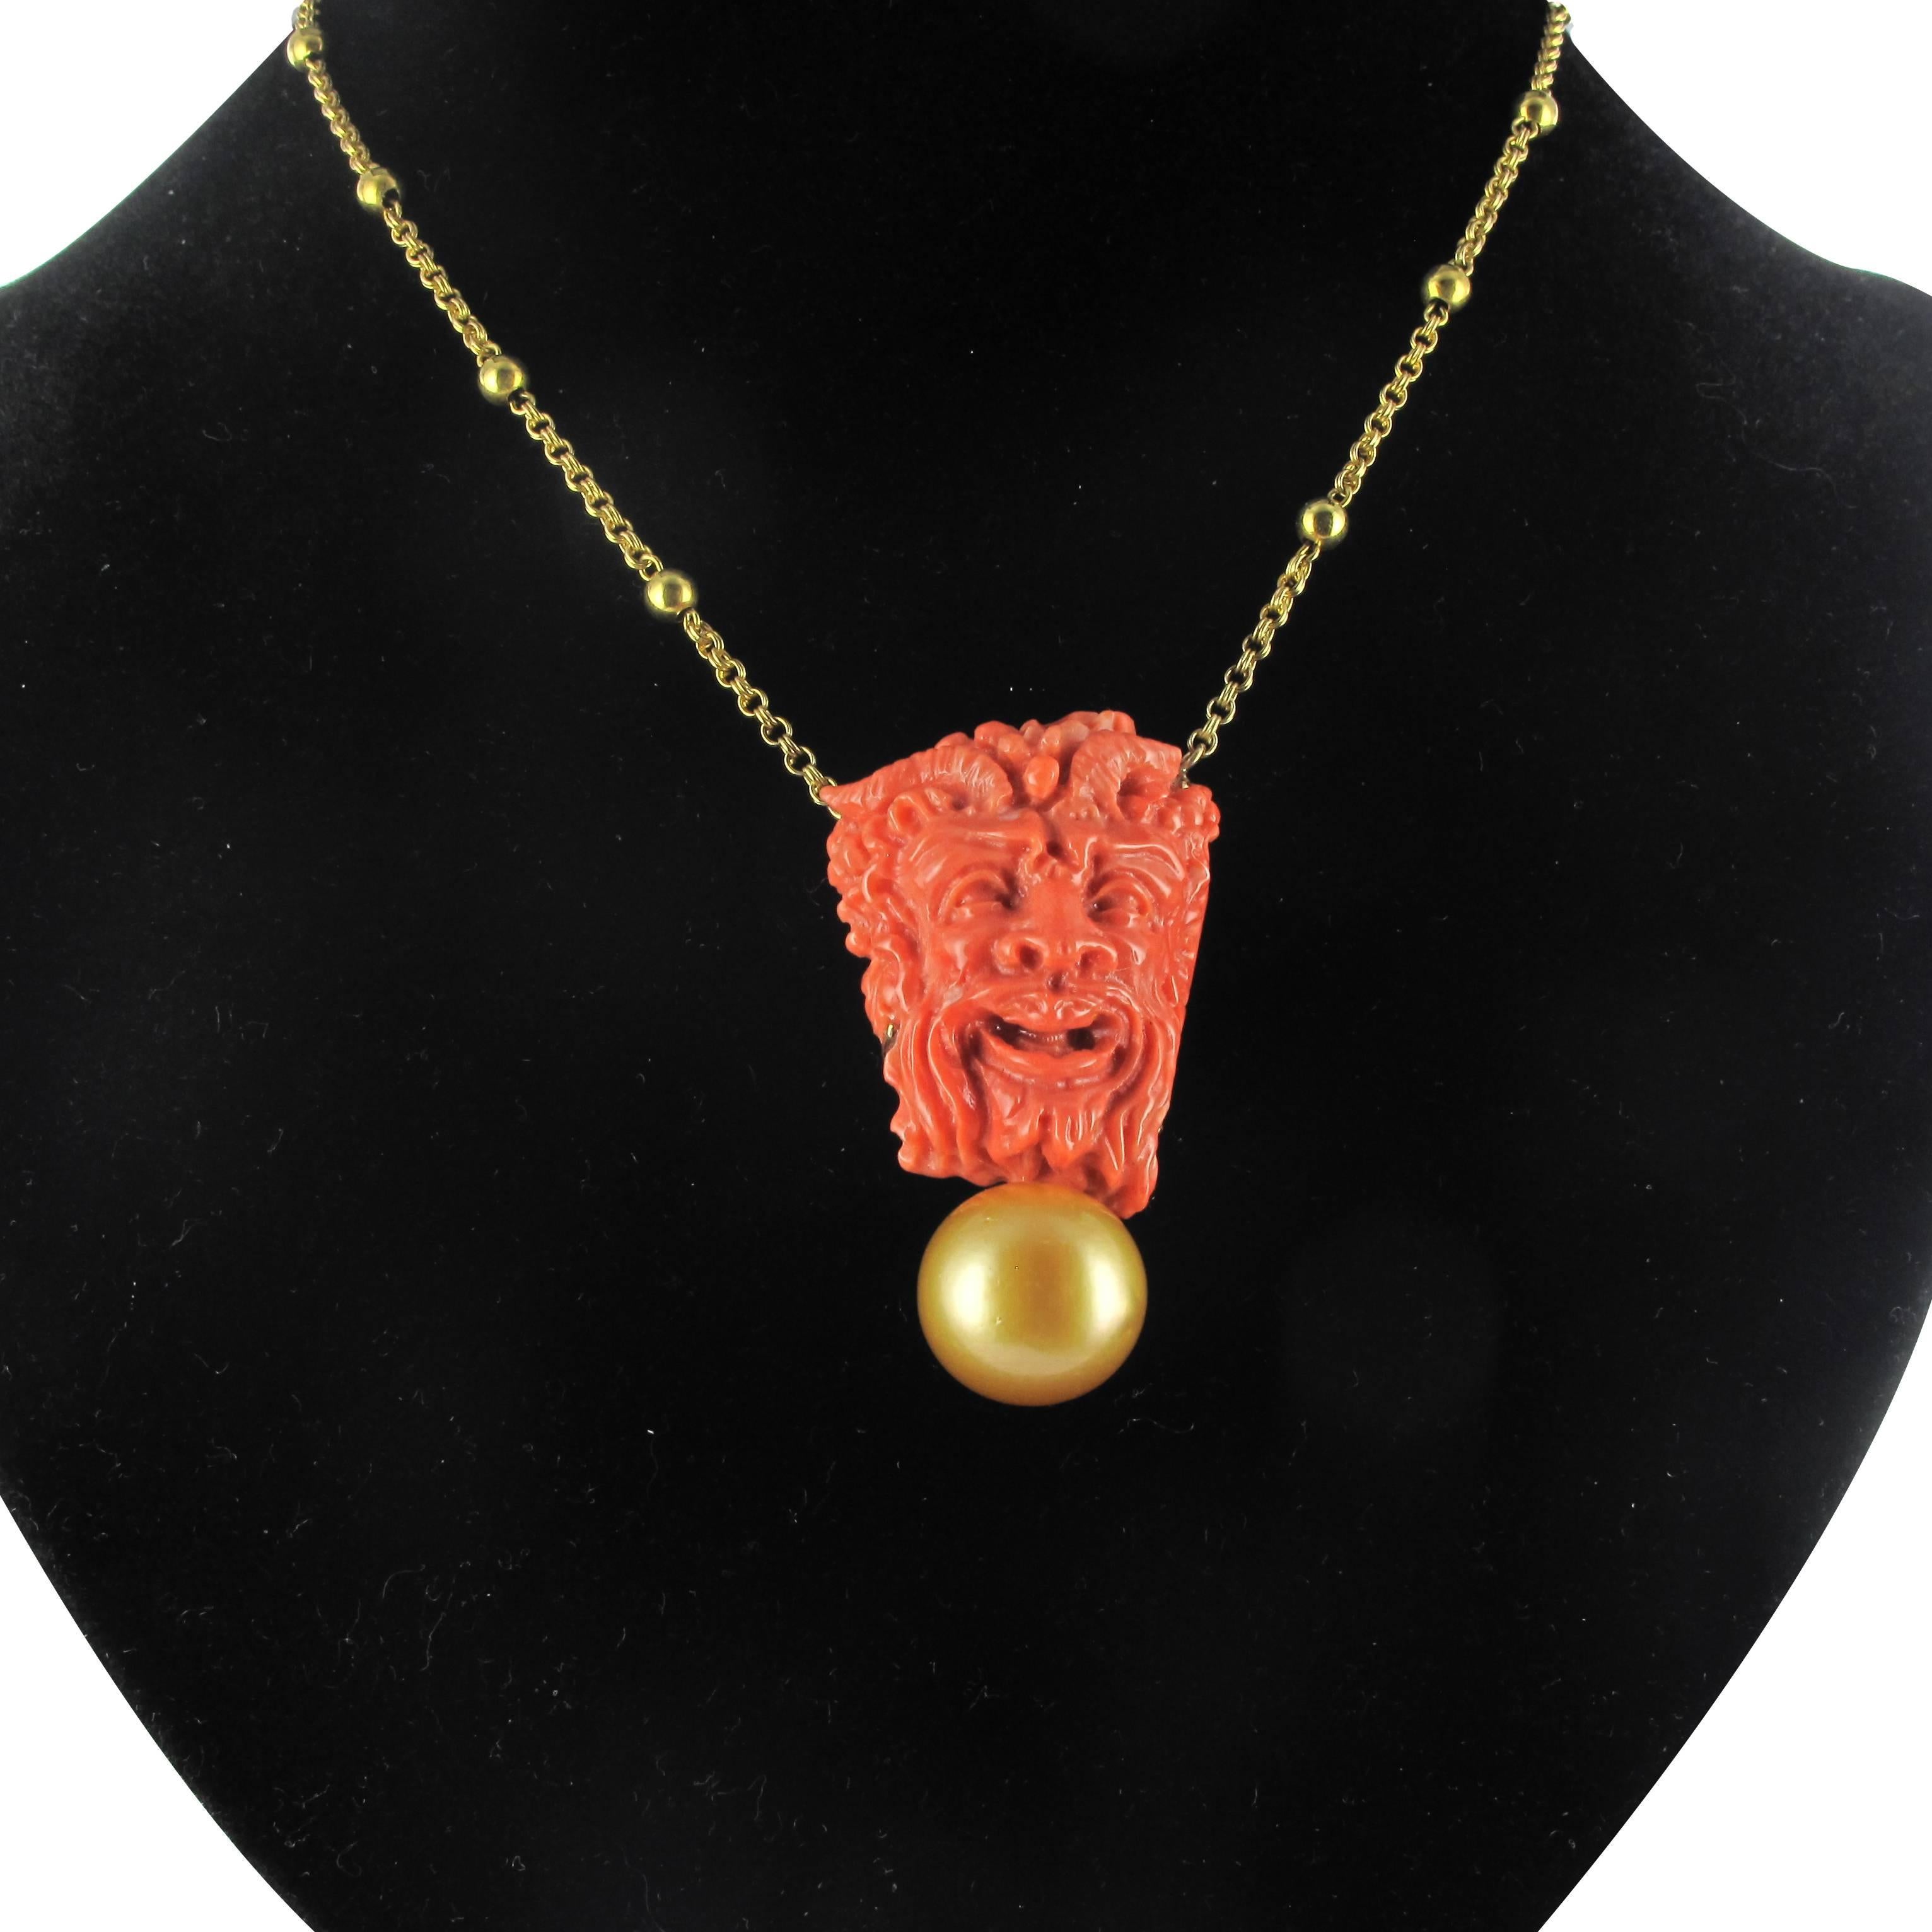 Baume creation - unique piece.
Necklace in 18 carat yellow gold.
This splendid and original yellow gold necklace is composed of a double belcher chain interspersed by golden beads. This gold beaded chain holds a coral cameo with a smirking Bacchus